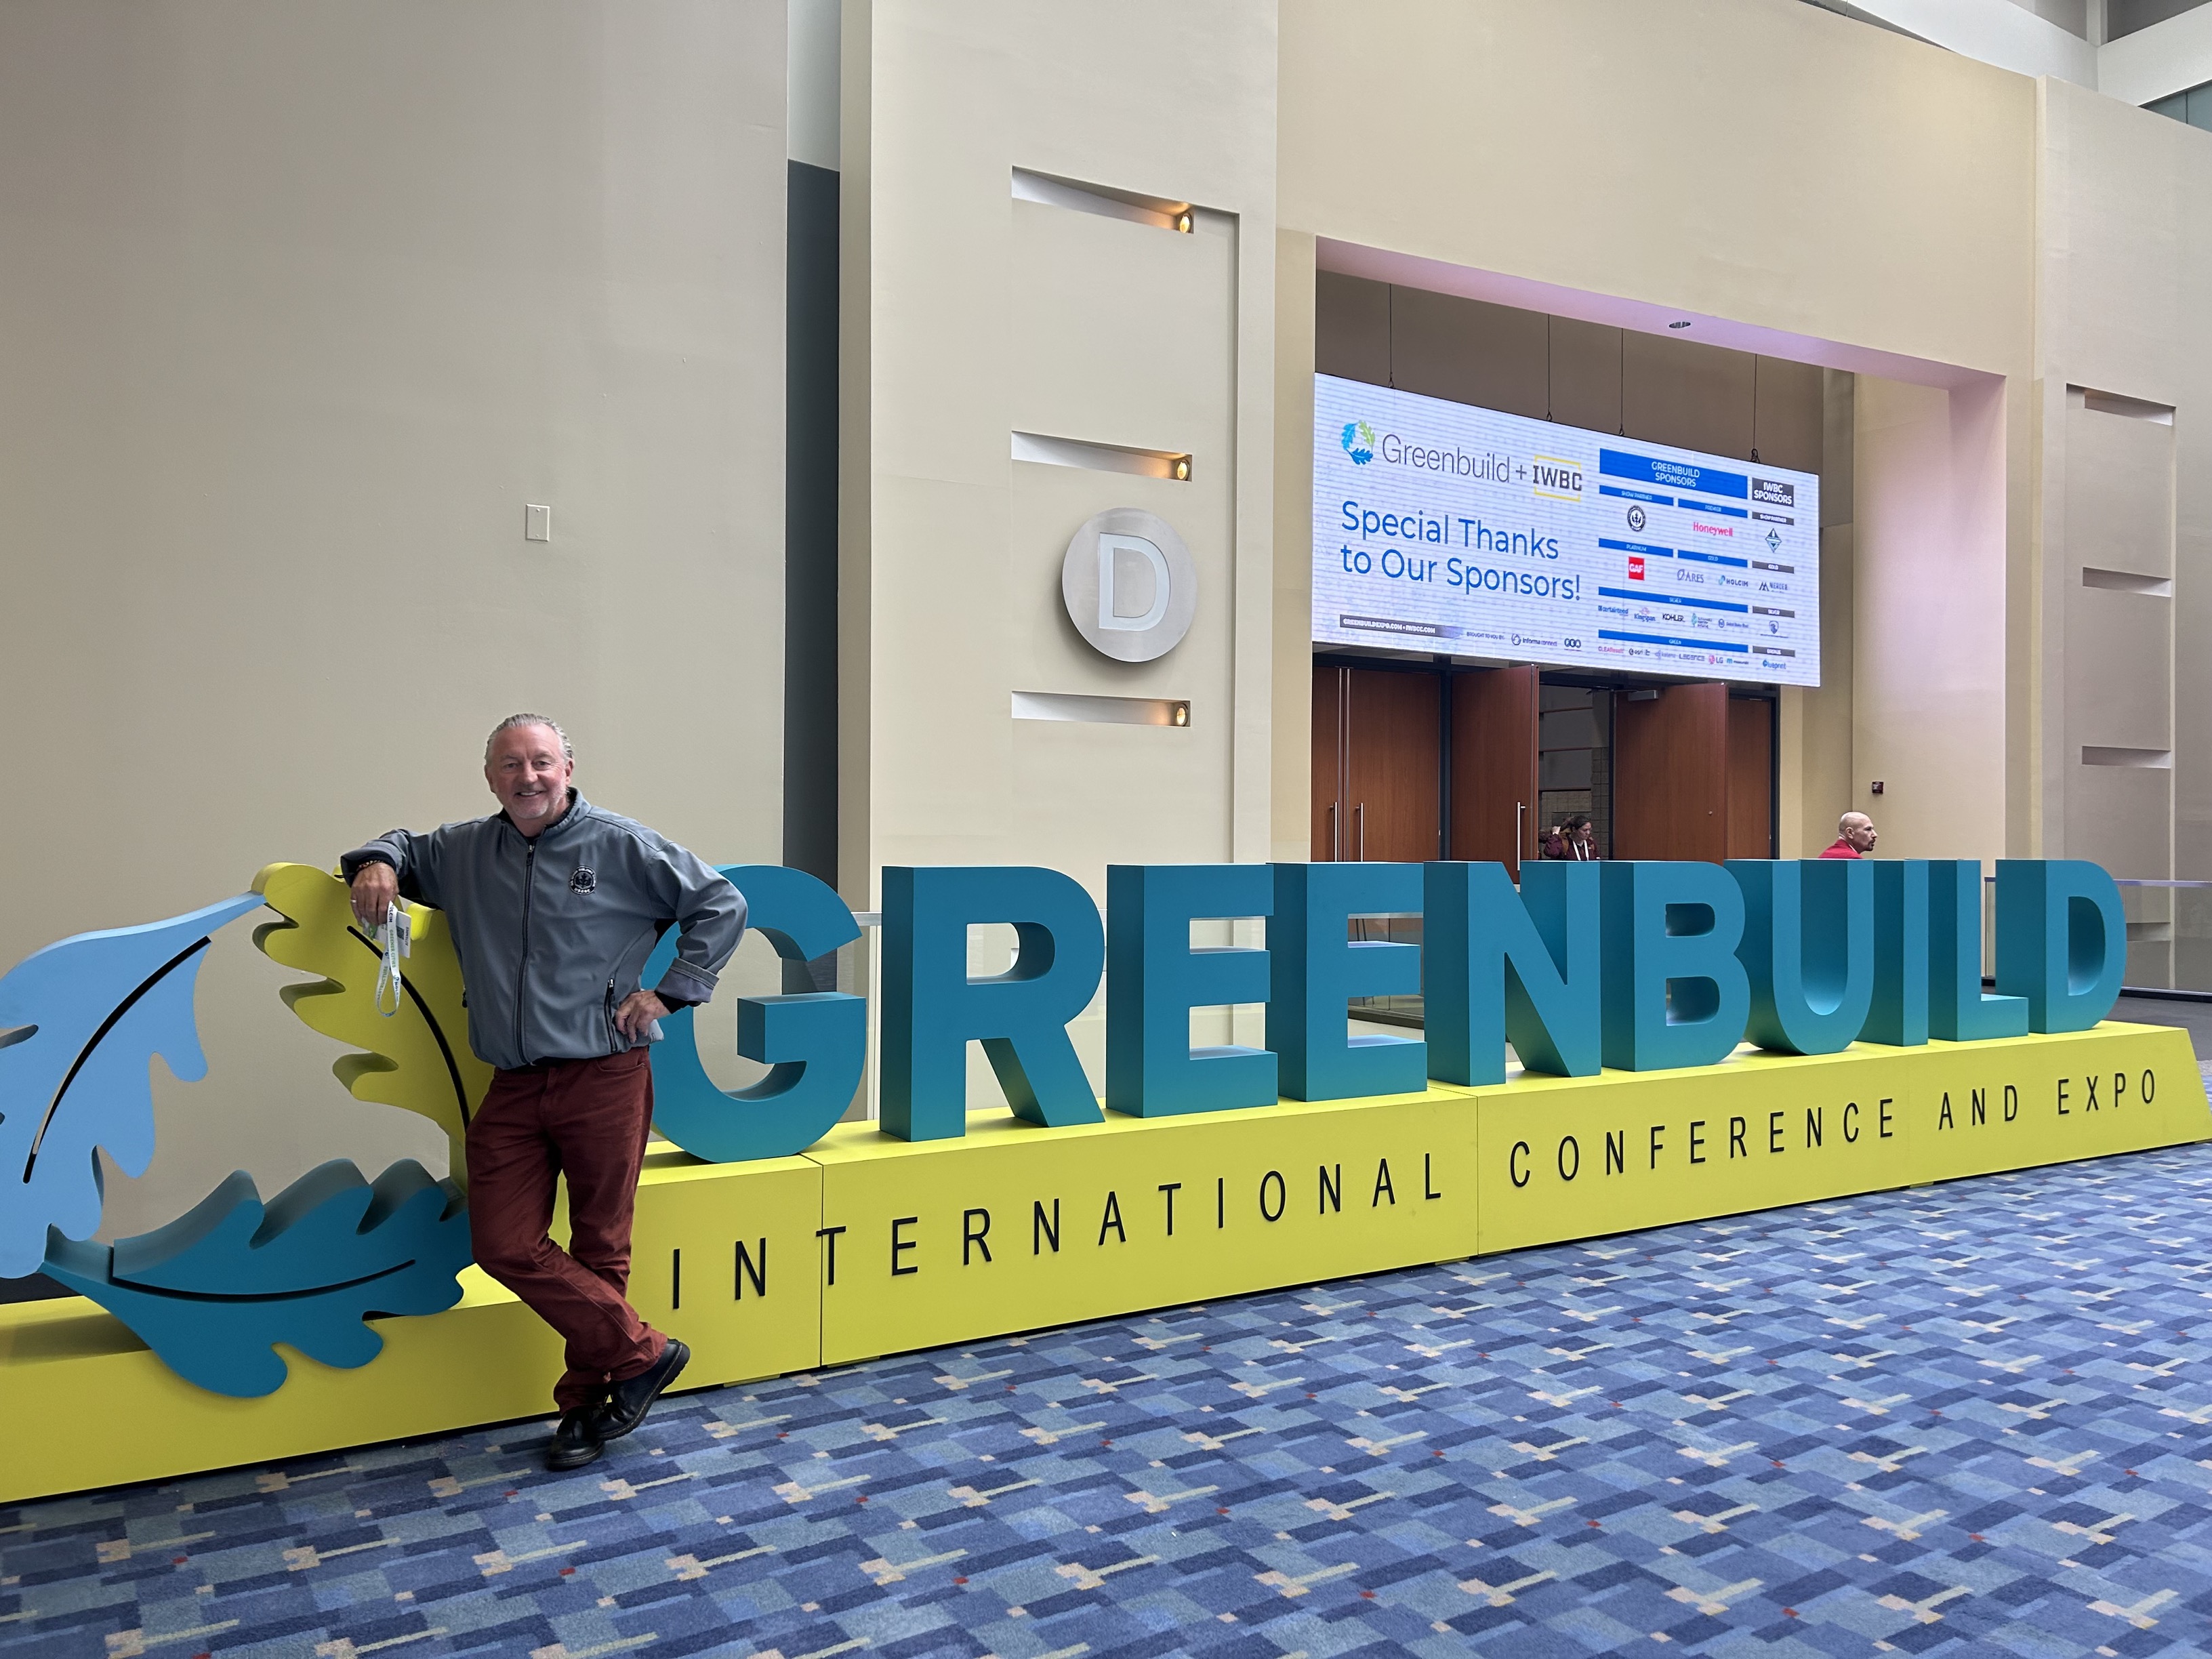 Introba founder Kevin Hydes standing by the Greenbuild conference sign